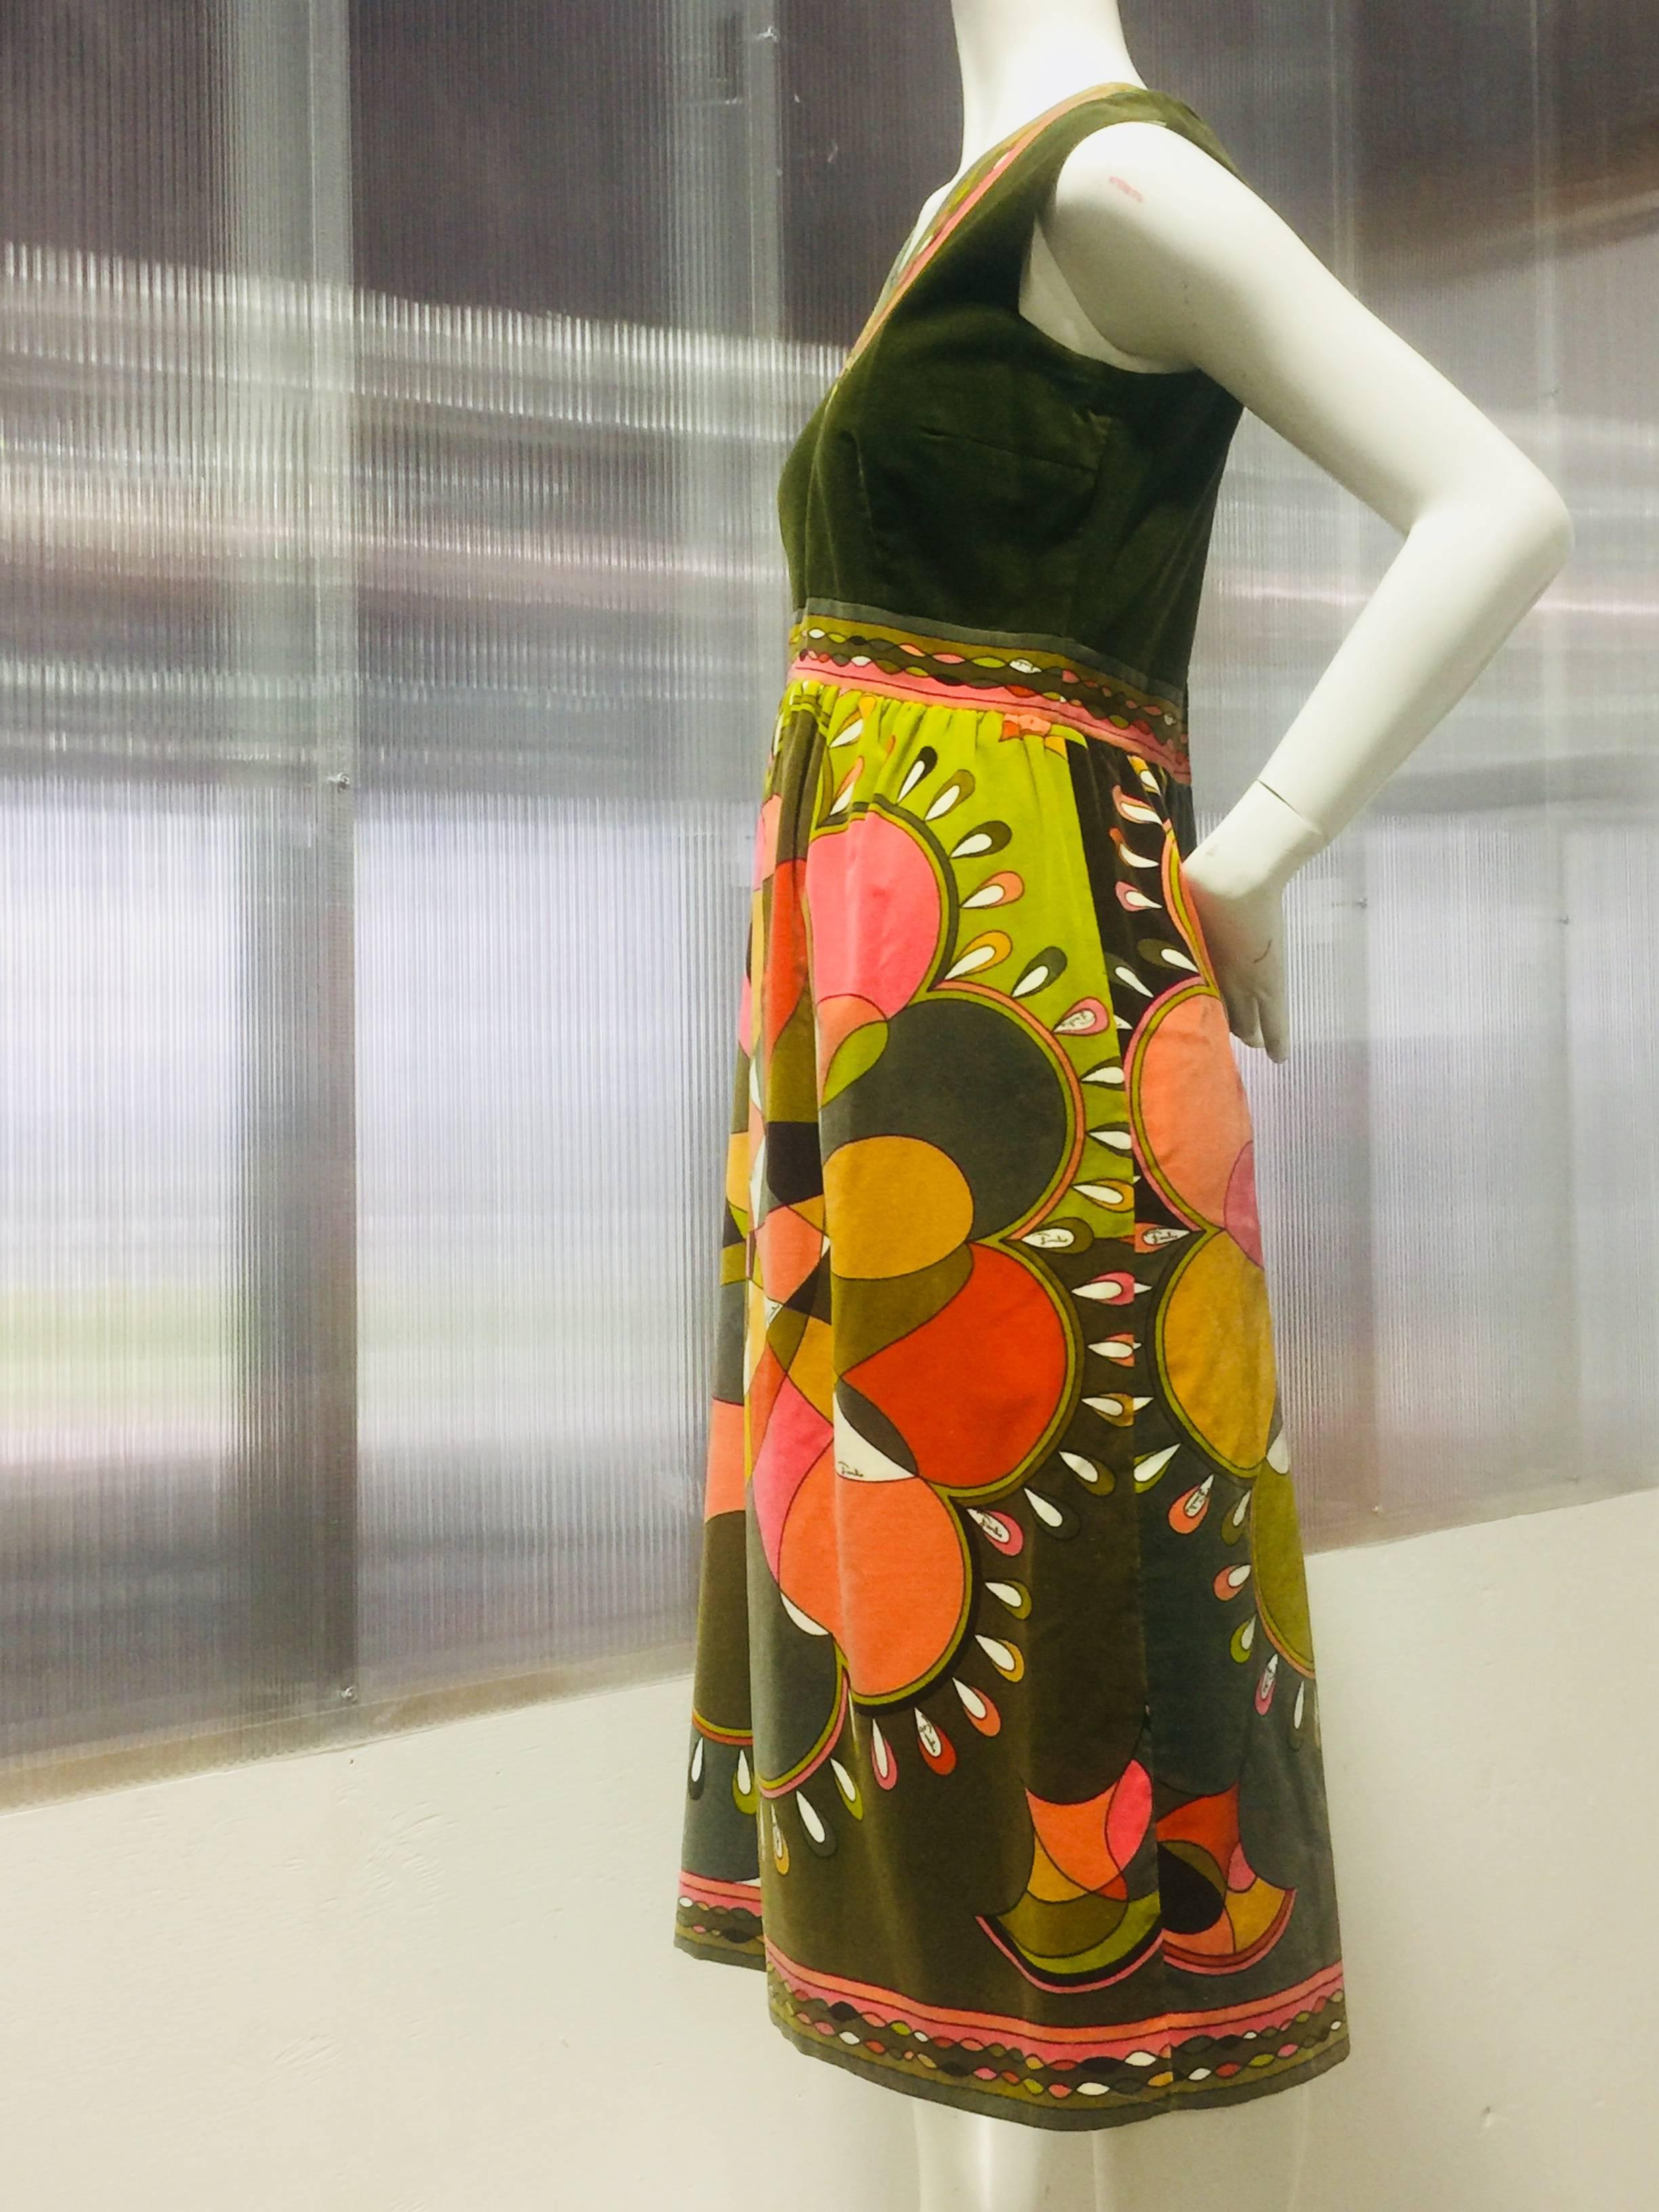 This iconic 1960's velvet Pucci print dress in deep olive green ,orange ,yellow and pink exude energy with the fusion of color that he mastered in this modern day design. The sophisticated couture quality baby doll style cut dress is framed with a